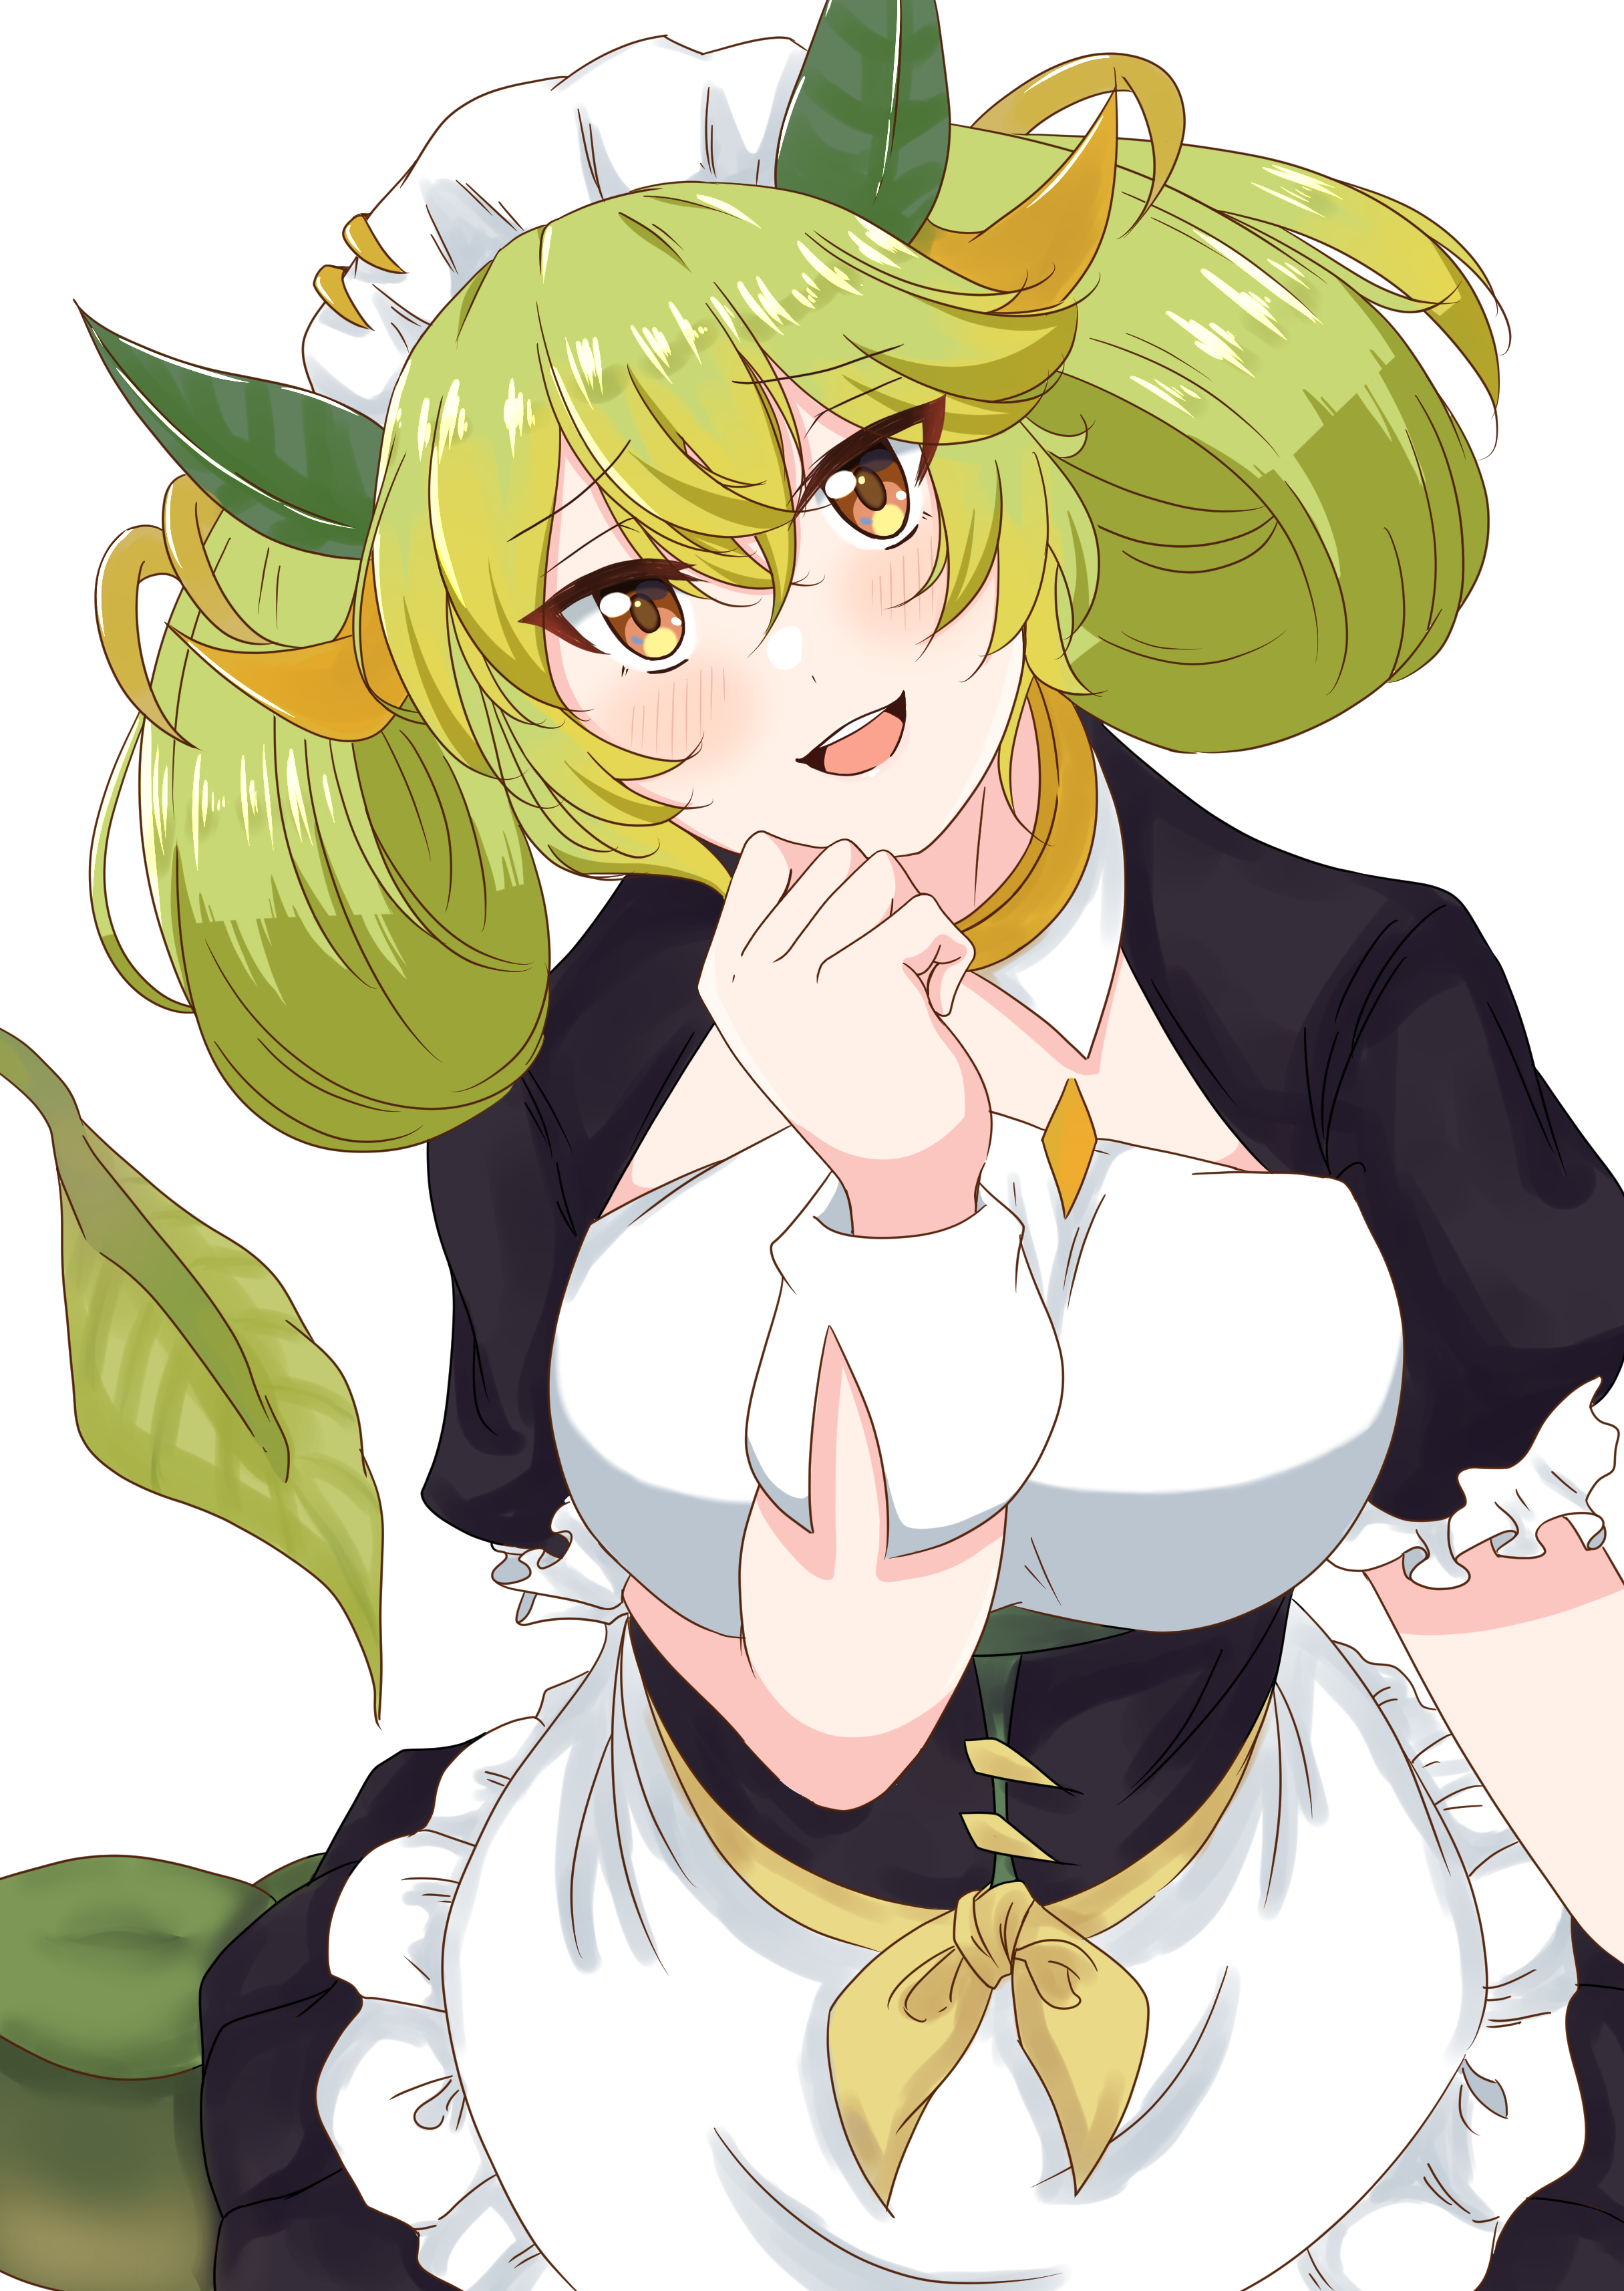 Anime Anime Girls Twintails Green Hair Maid Maid Outfit Yu Gi Oh Trading Card Games Parlor Dragonmai 2431x3429